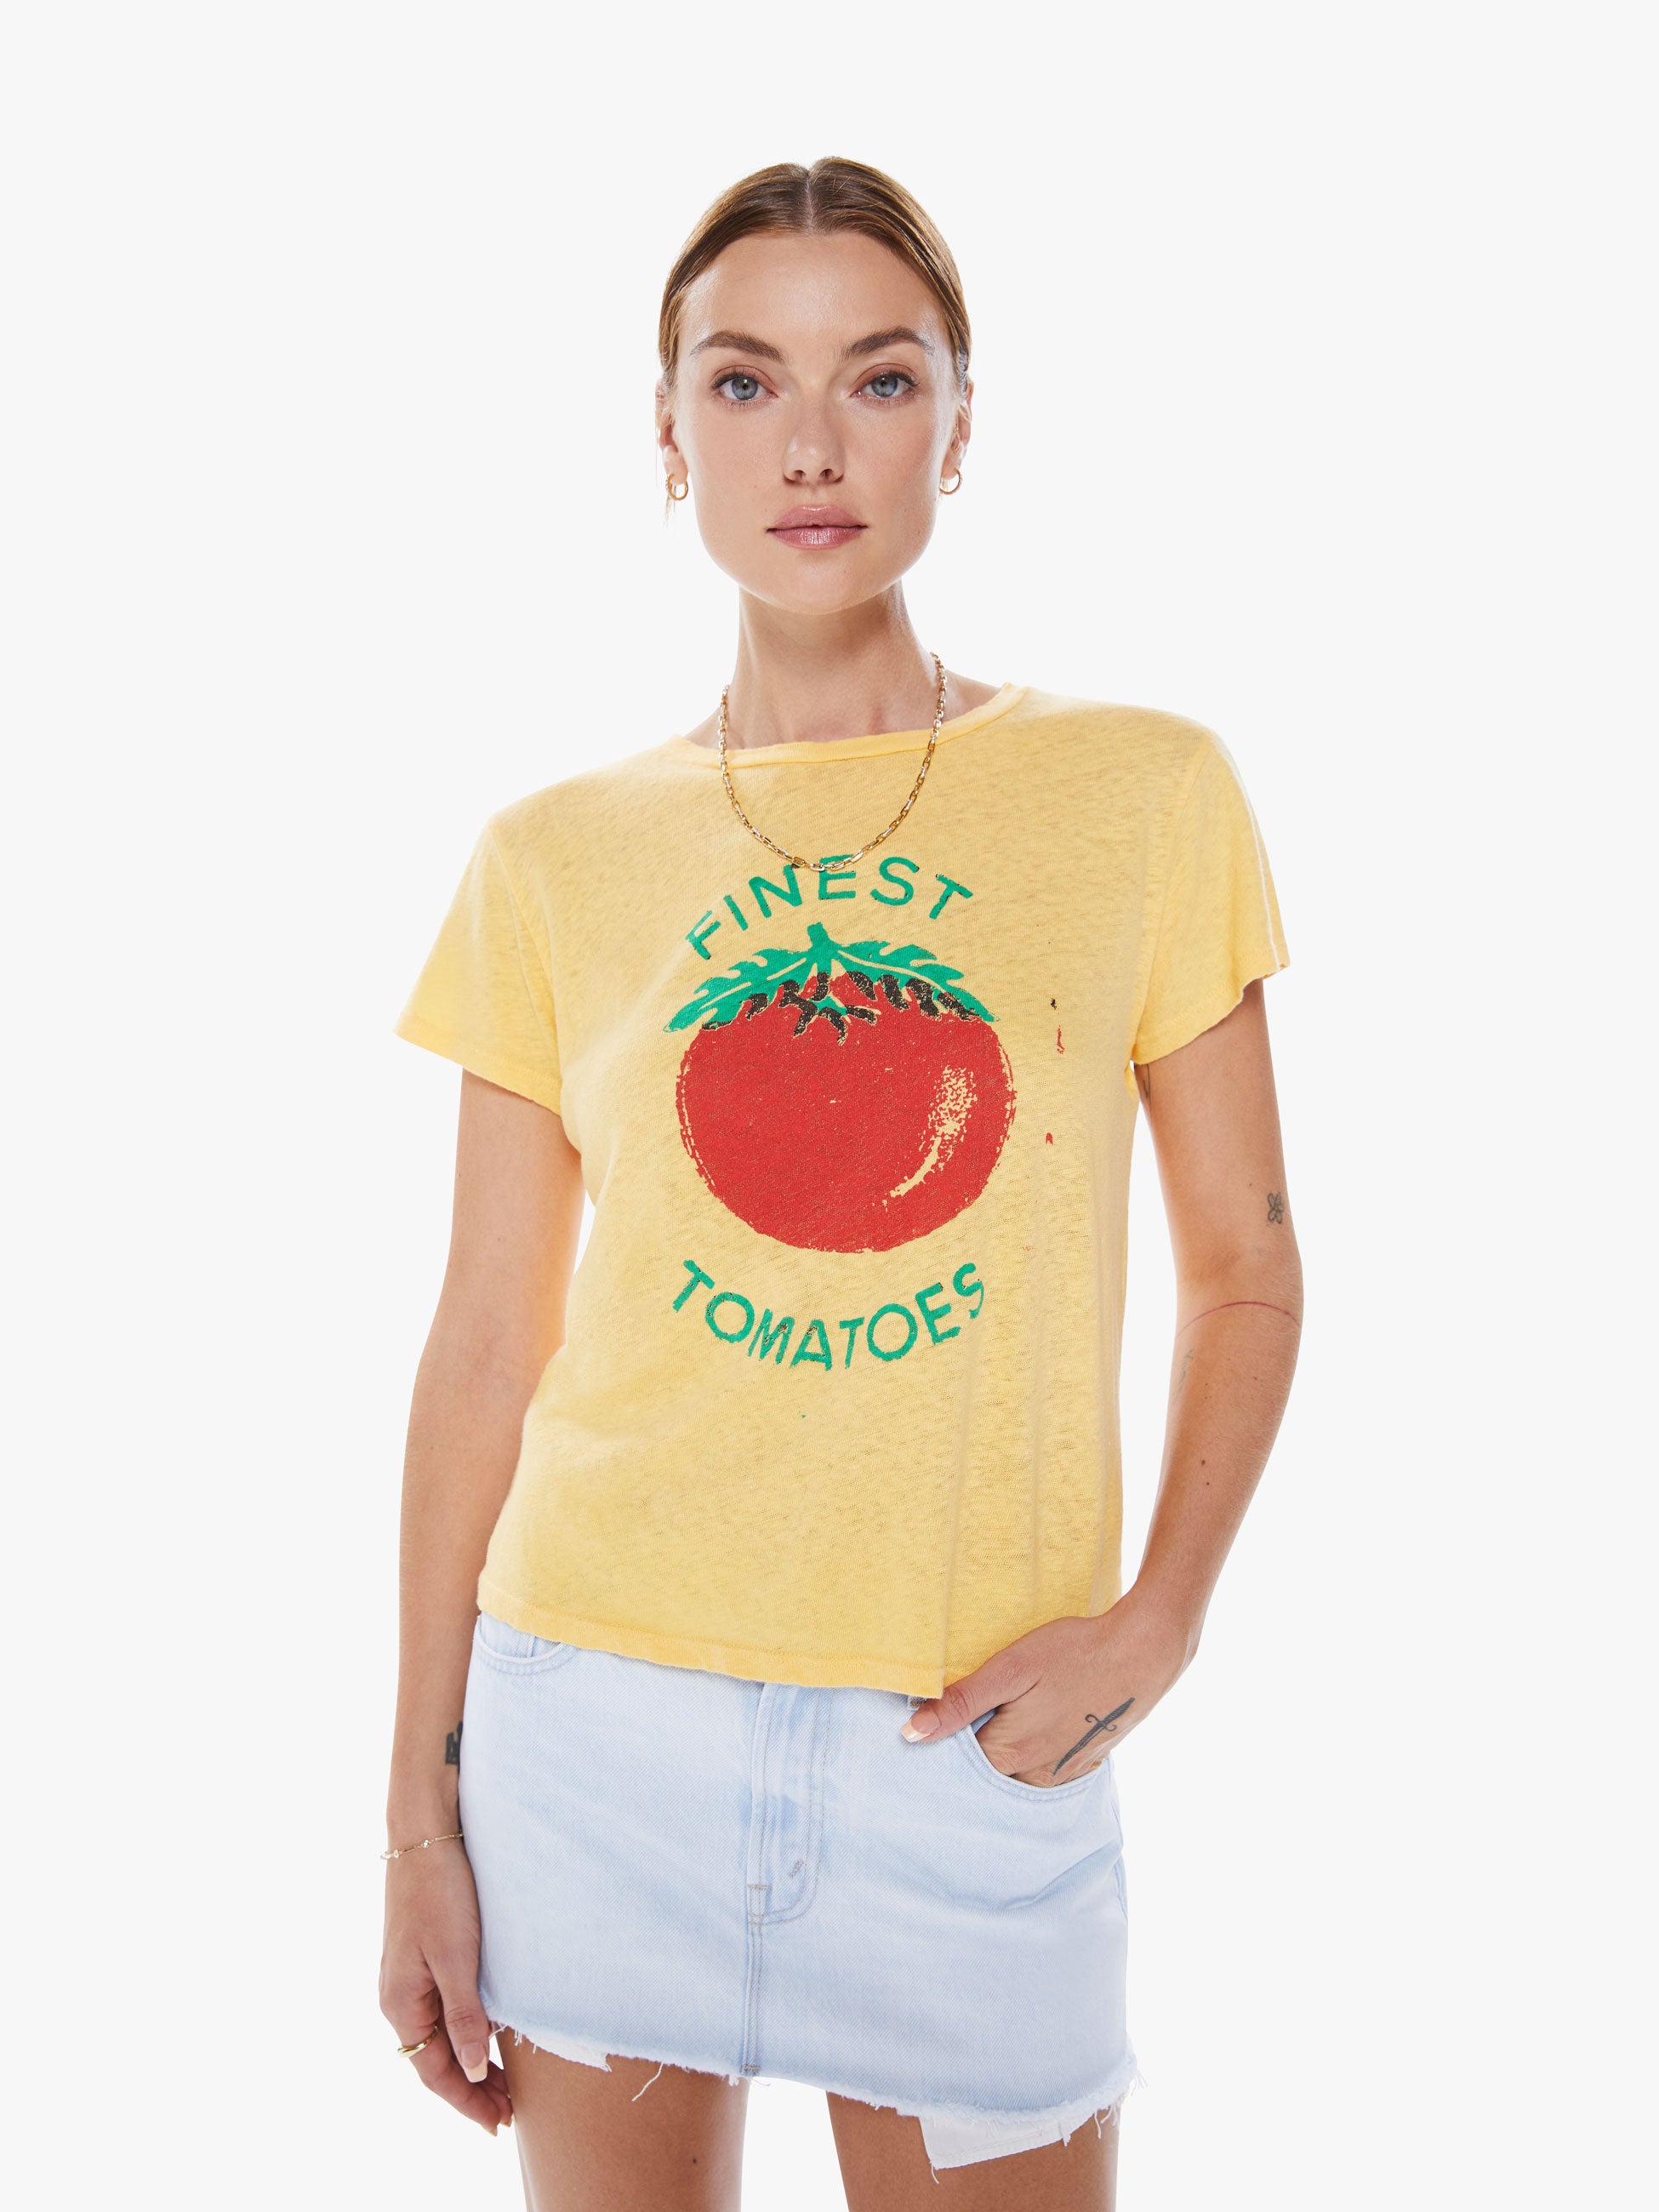 MOTHER THE SINFUL FINEST TOMATOES TEE SHIRT